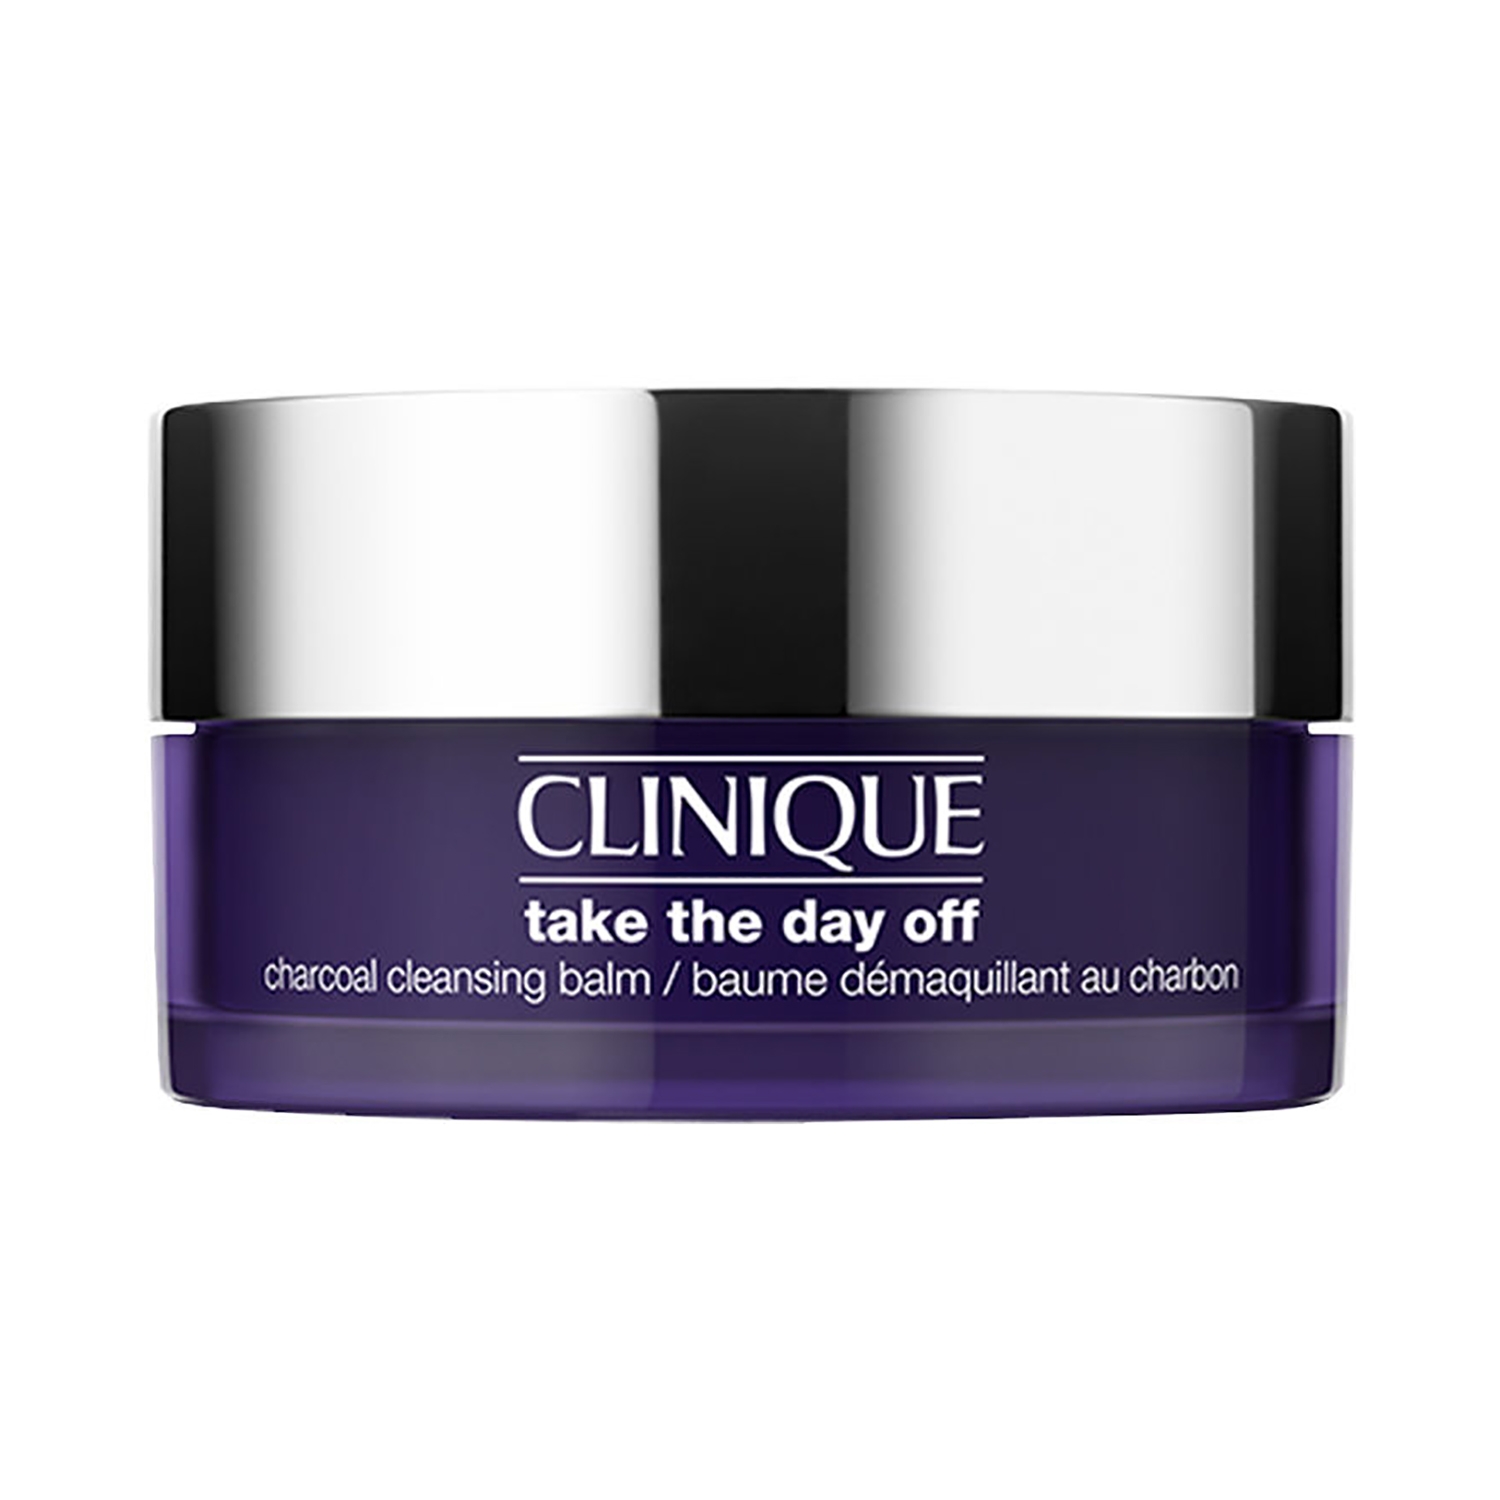 CLINIQUE | CLINIQUE Take The Day Off Charcoal Cleansing Balm (125ml)